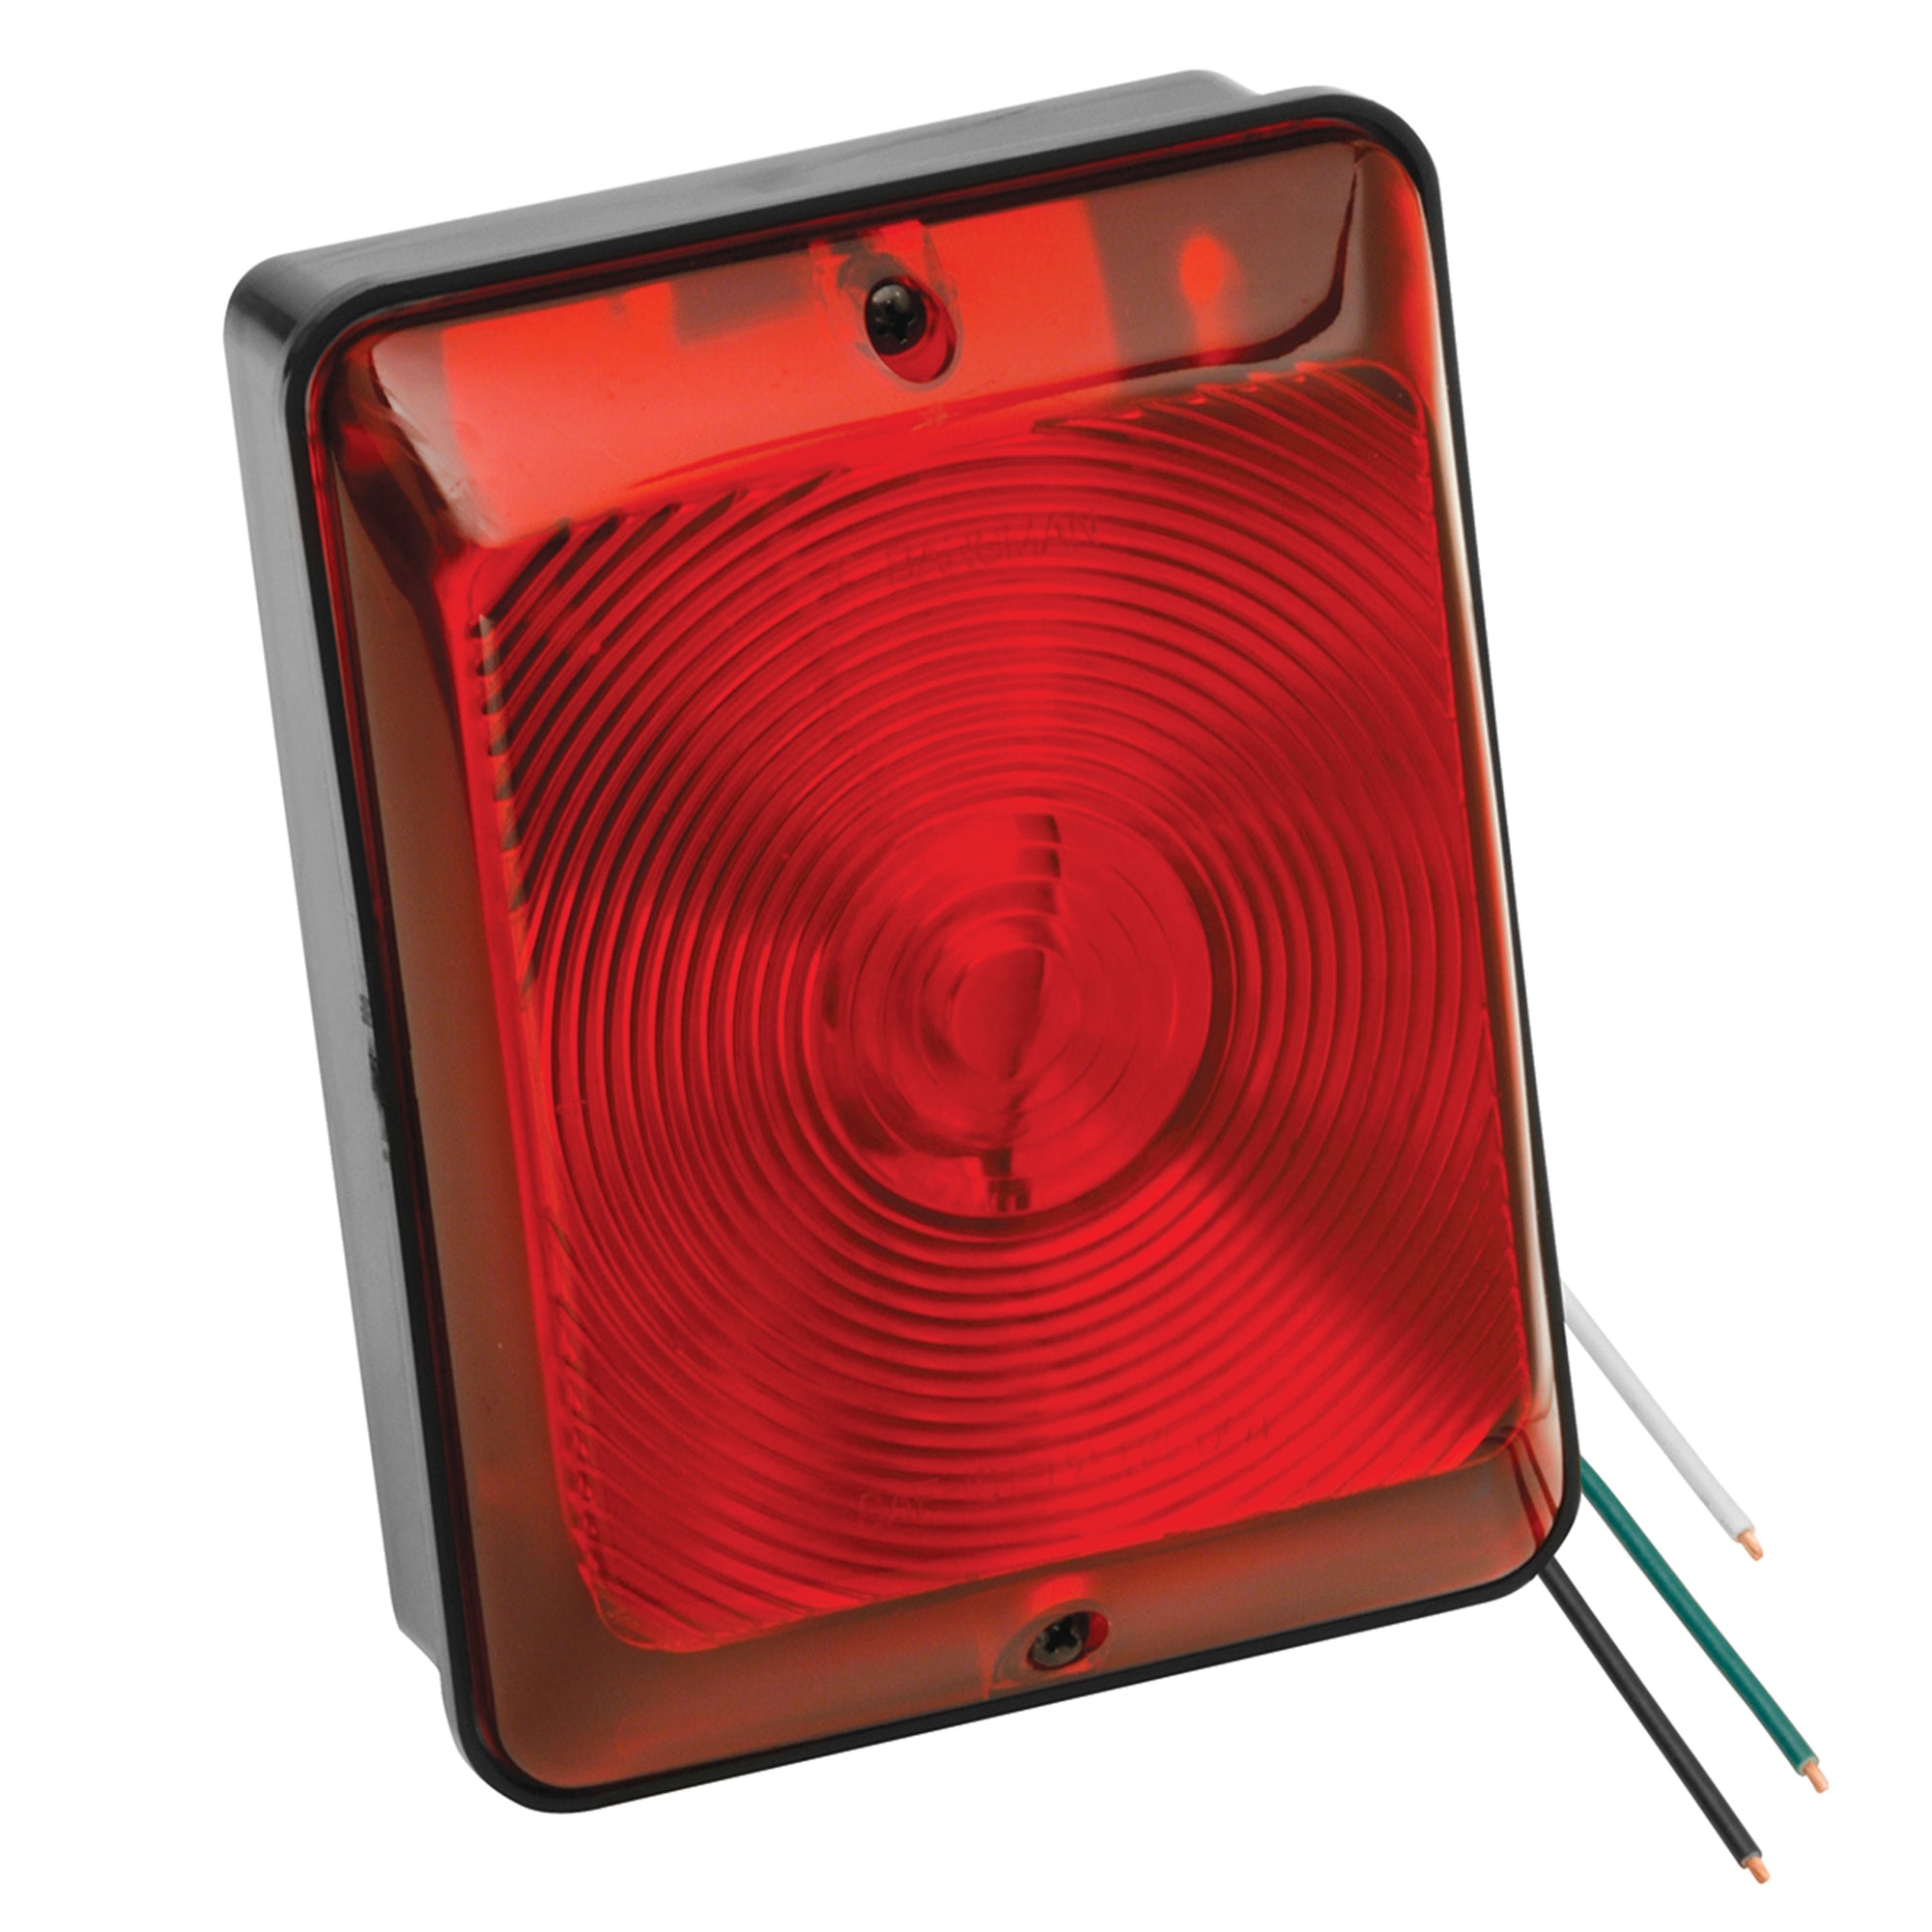 Bargman 31-86-101 Taillight #86 - Single Stop-Trail-Turn with Black Base